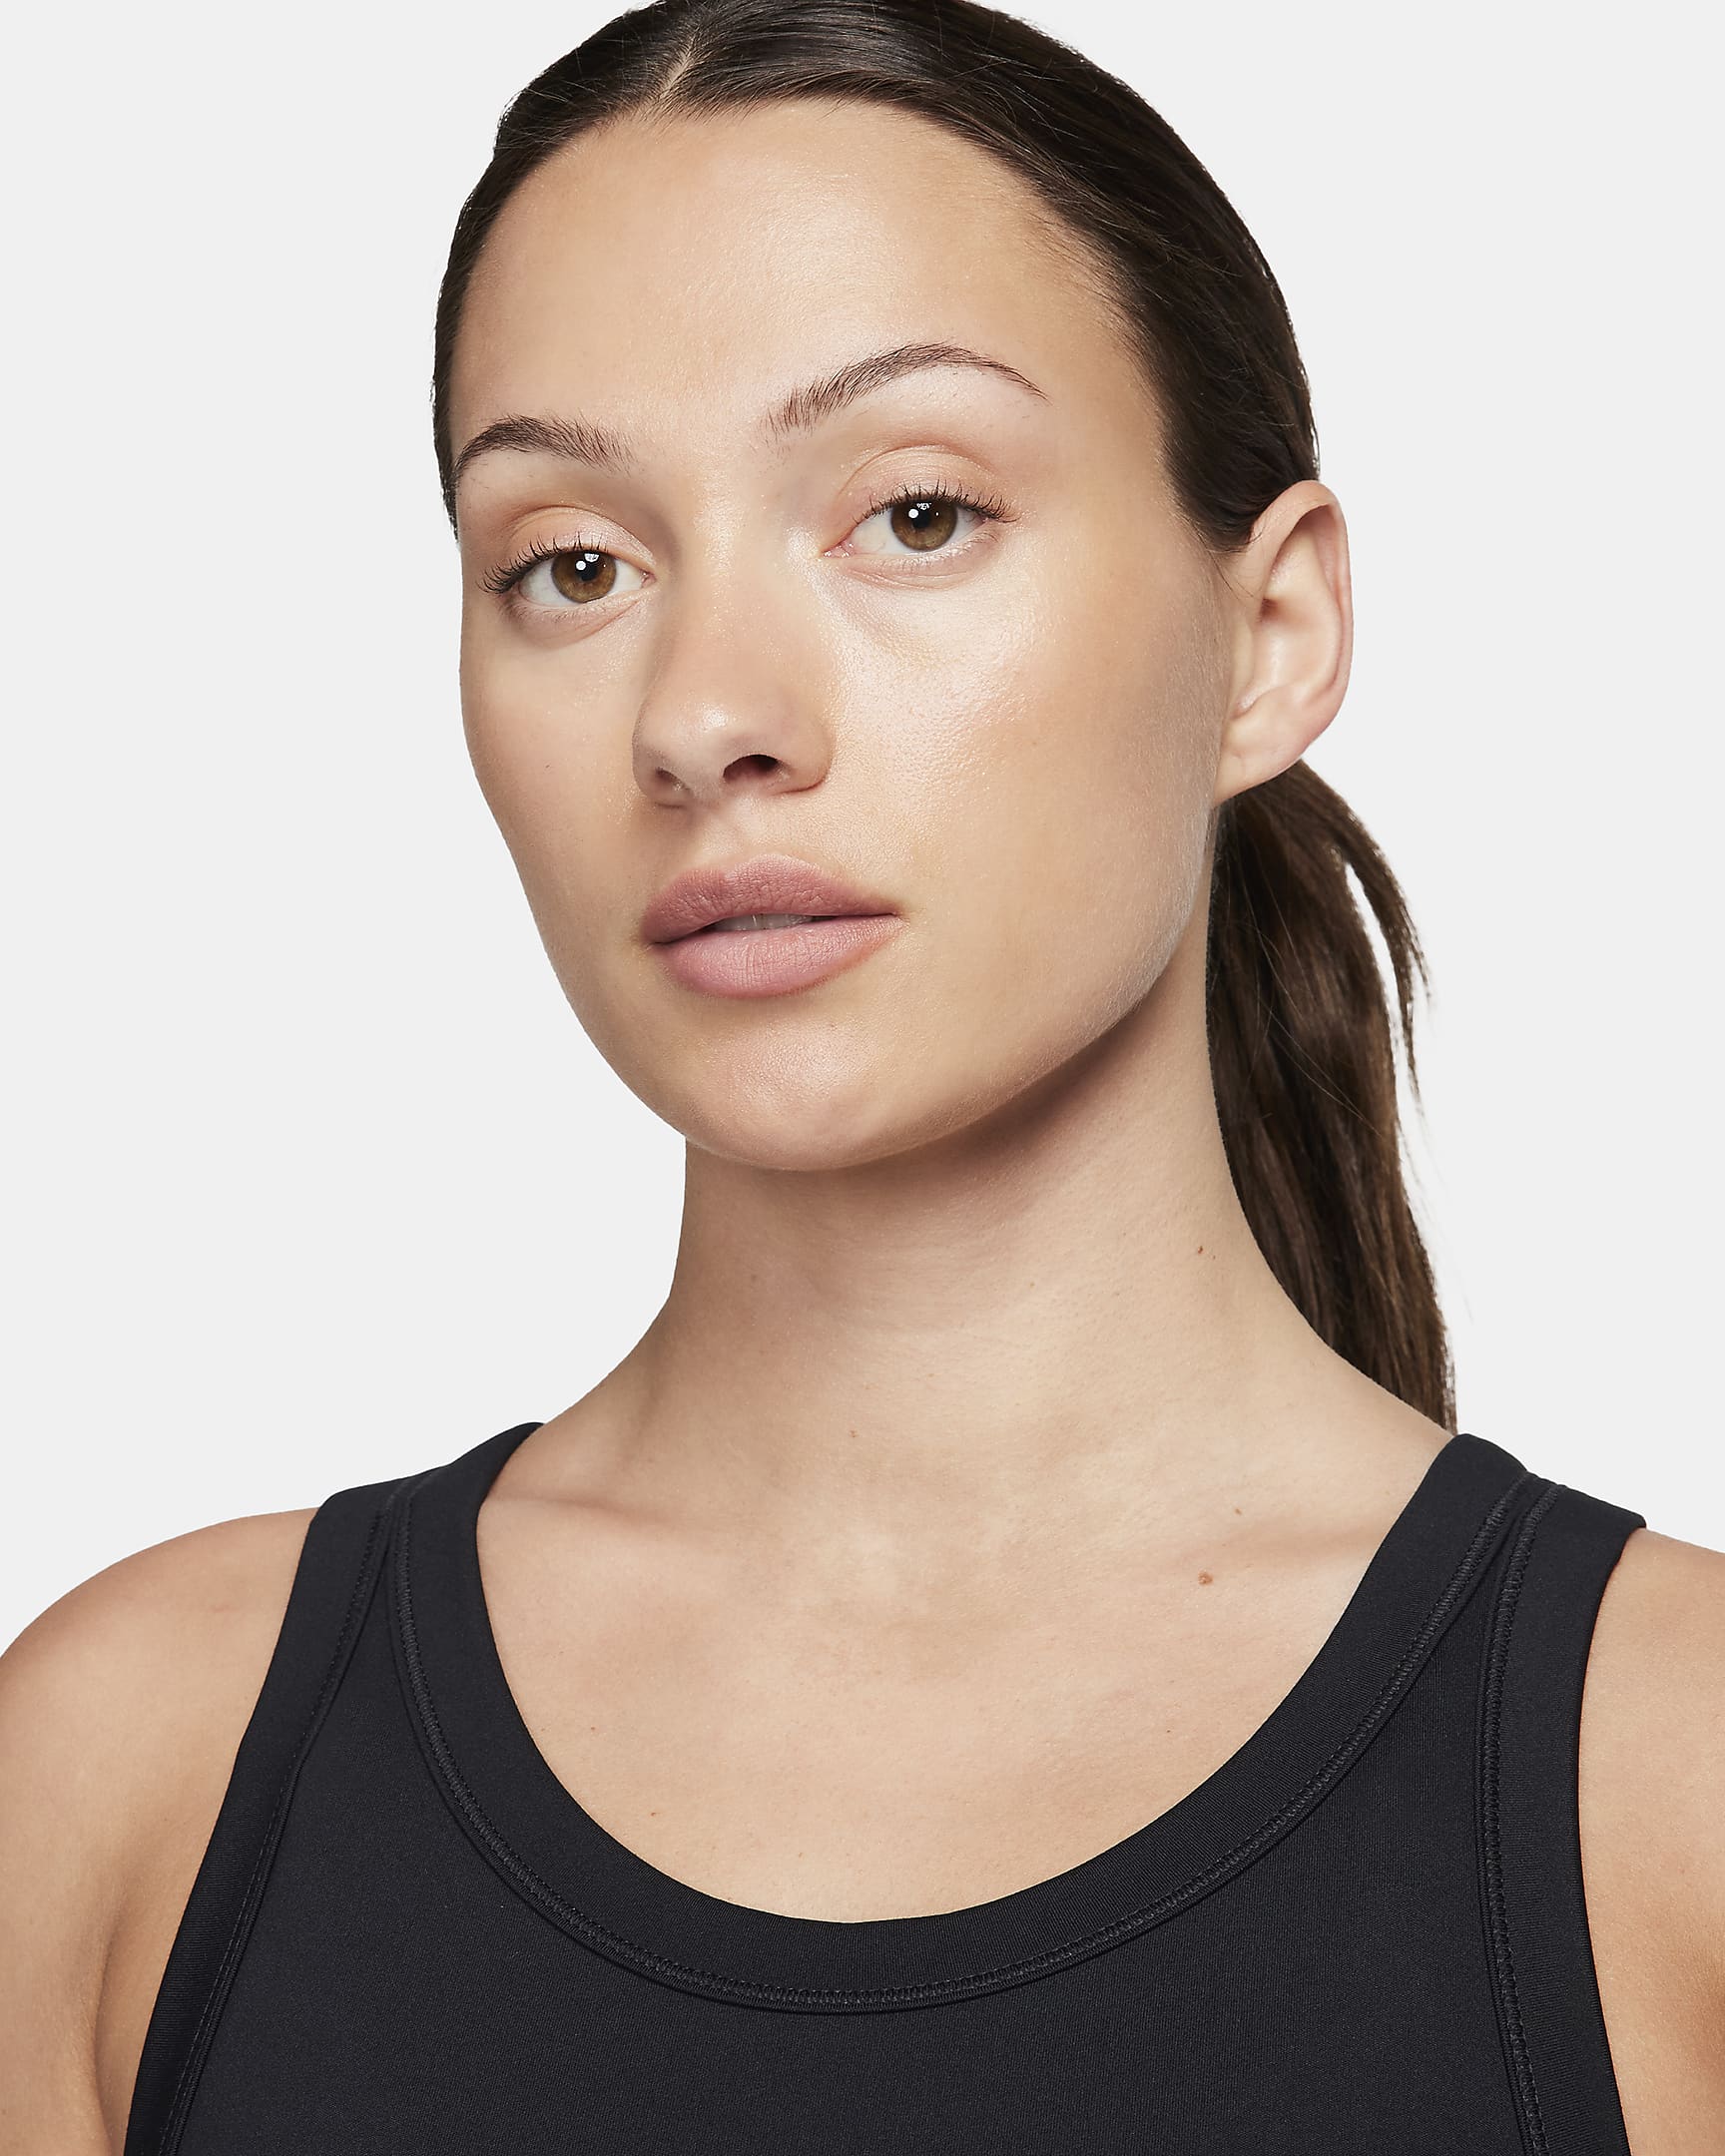 Nike One Fitted Women's Dri-FIT Strappy Cropped Tank Top - Black/Black